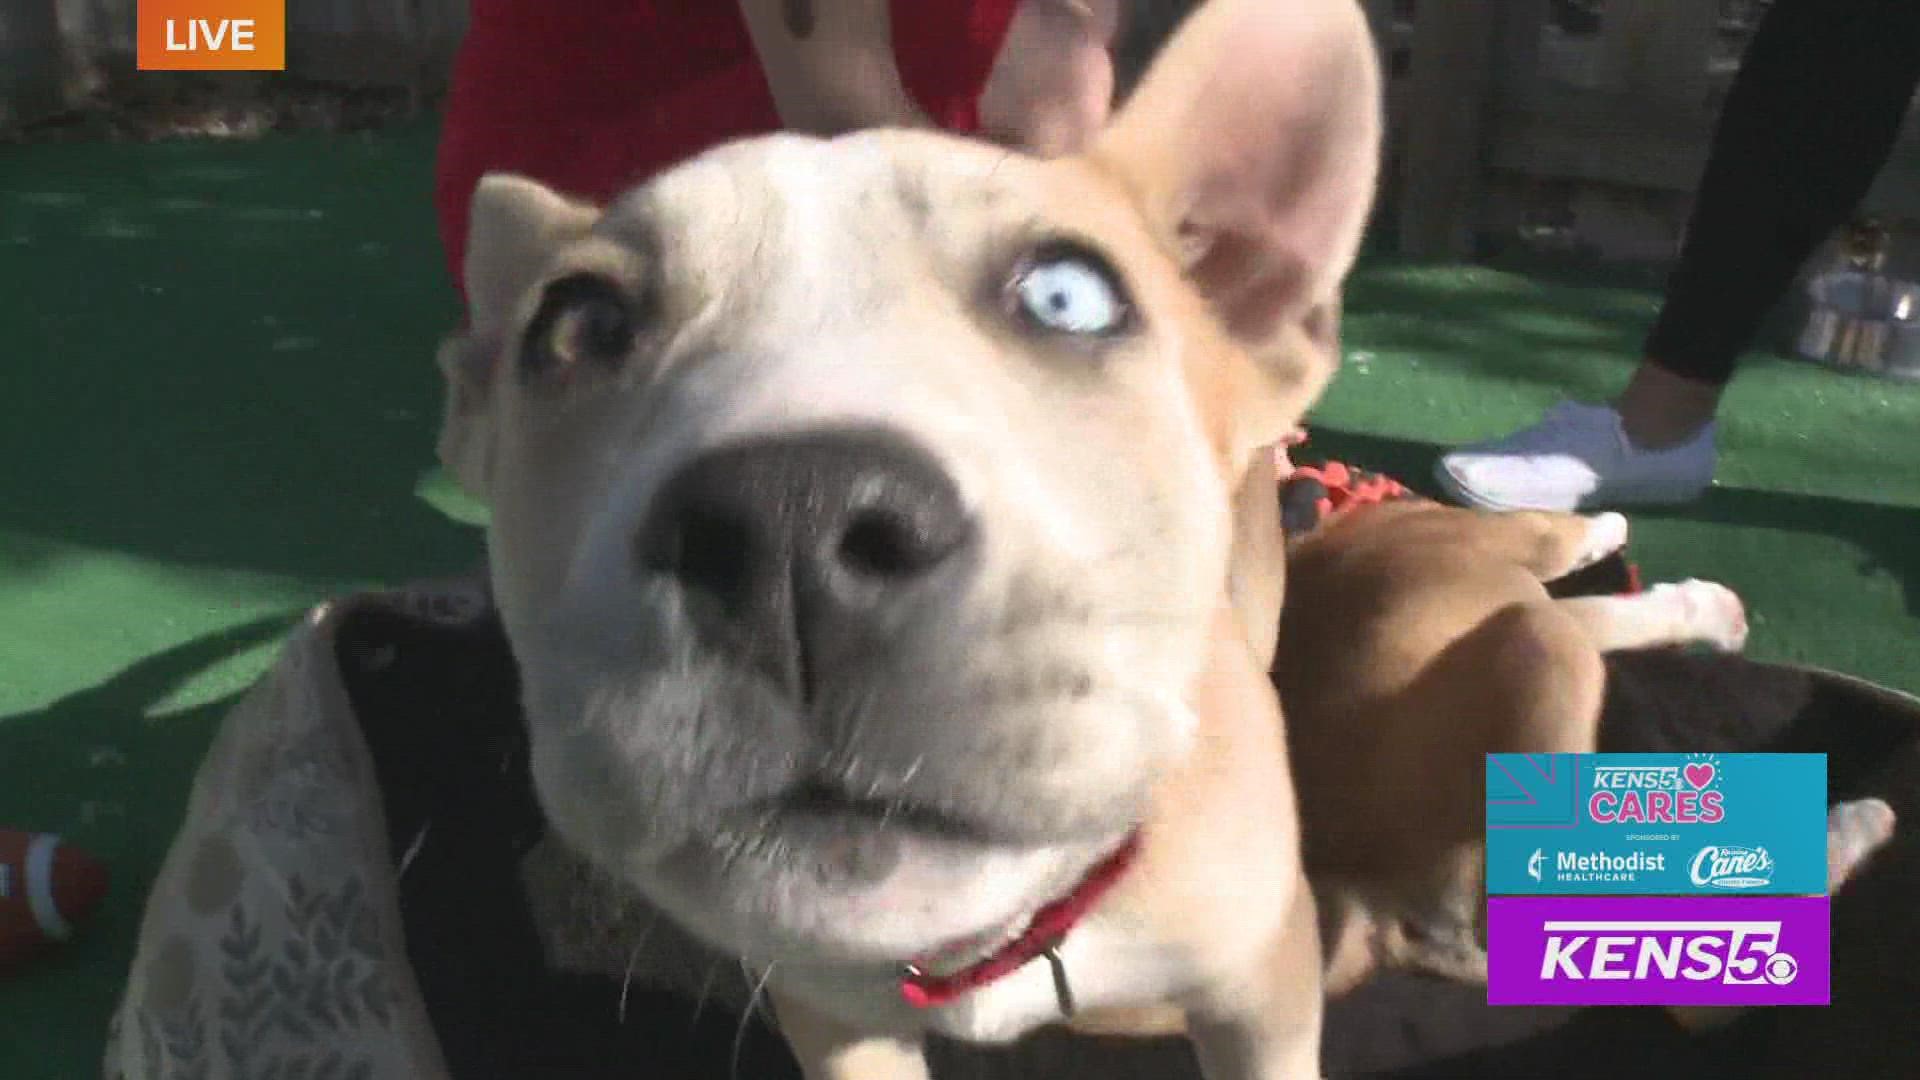 Alamo City Pit Bulls introduces us to some dogs who need a loving home